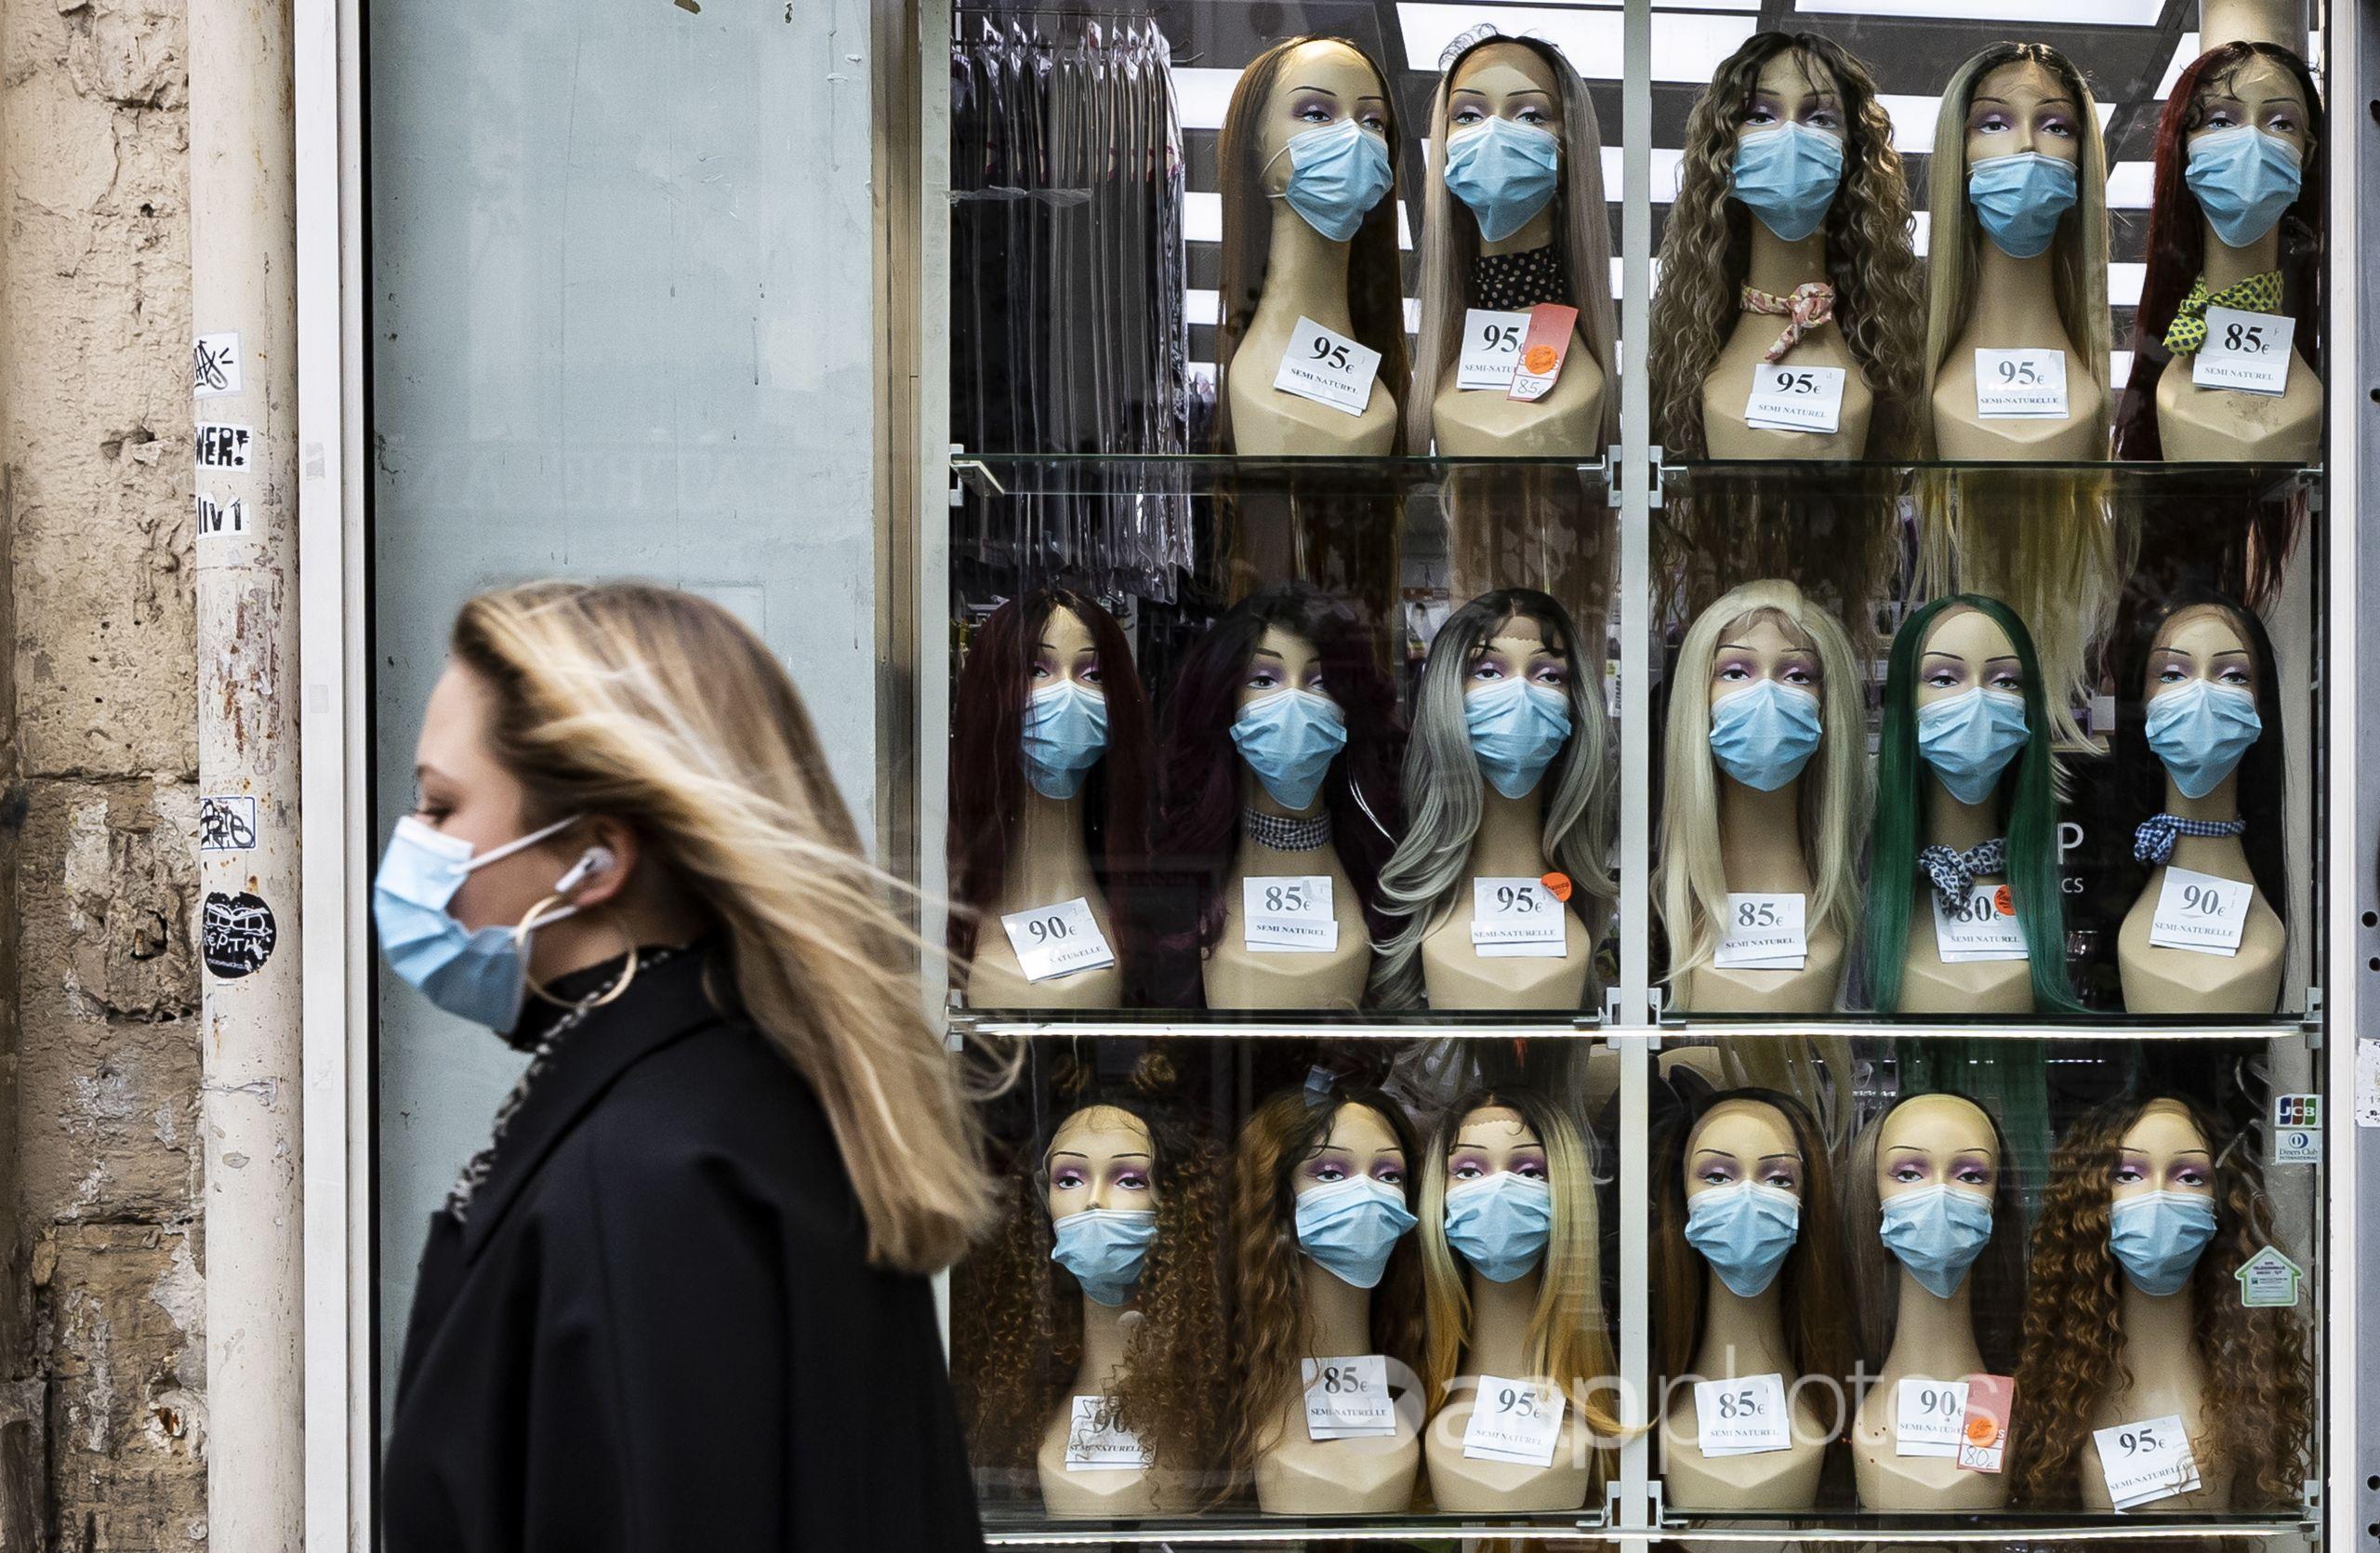 A woman wearing a face mask walks past a shop displaying masks